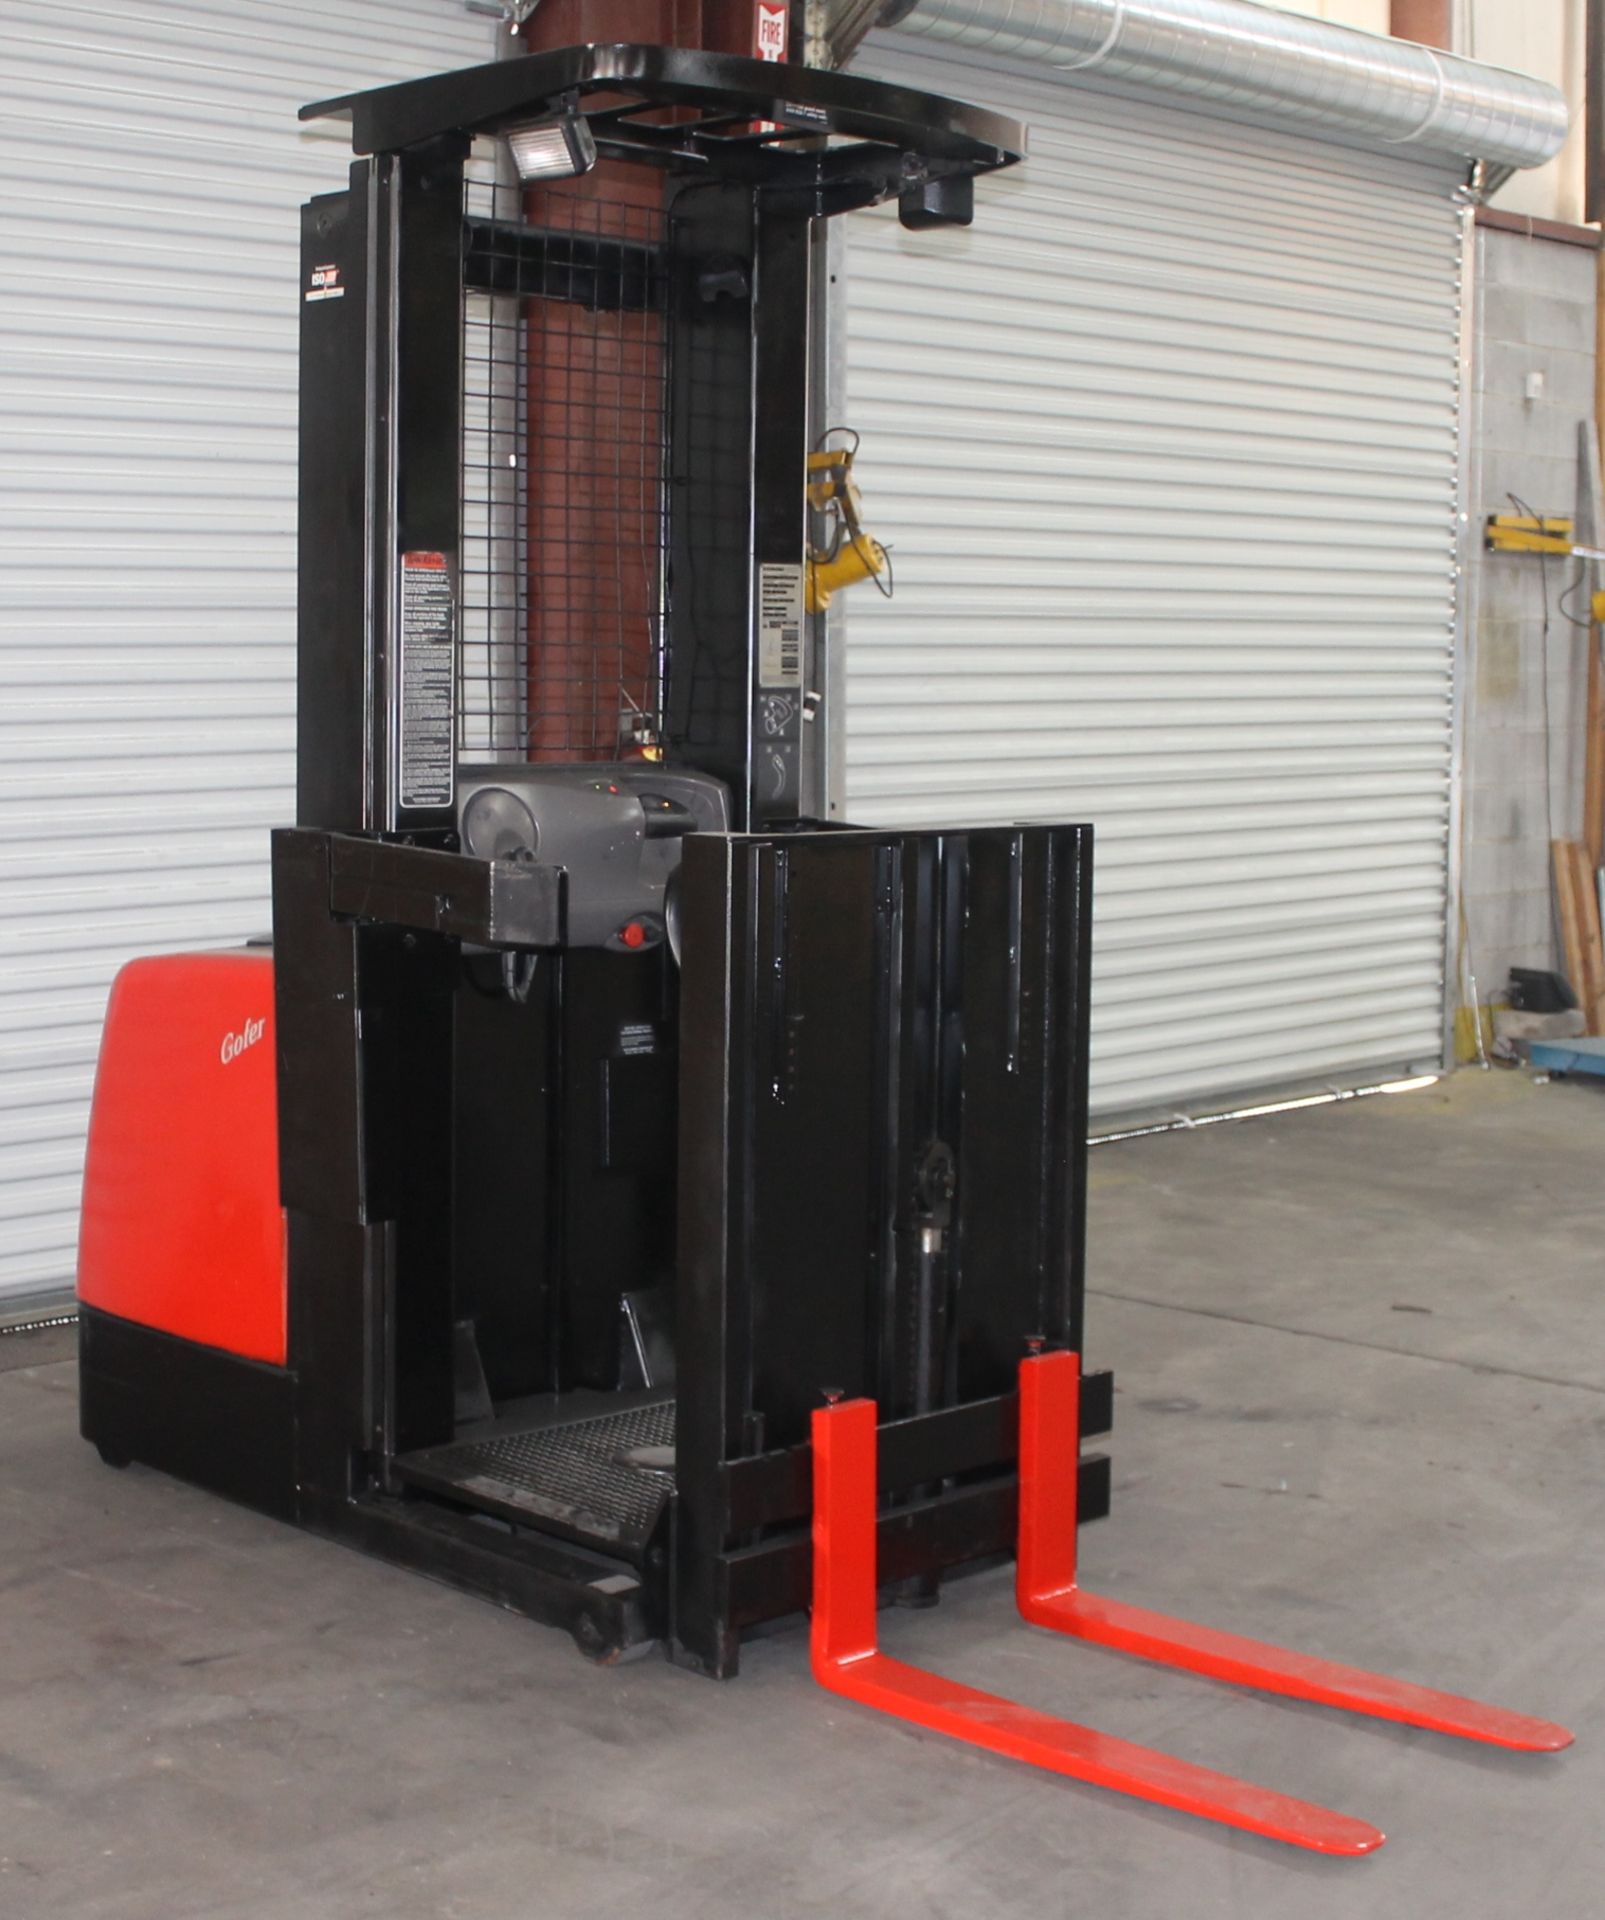 2003 RAYMOND ORDER PICKER WITH ERGO LIFT / MINI MAST FEATURE, CLICK HERE TO WATCH VIDEO - Image 3 of 8